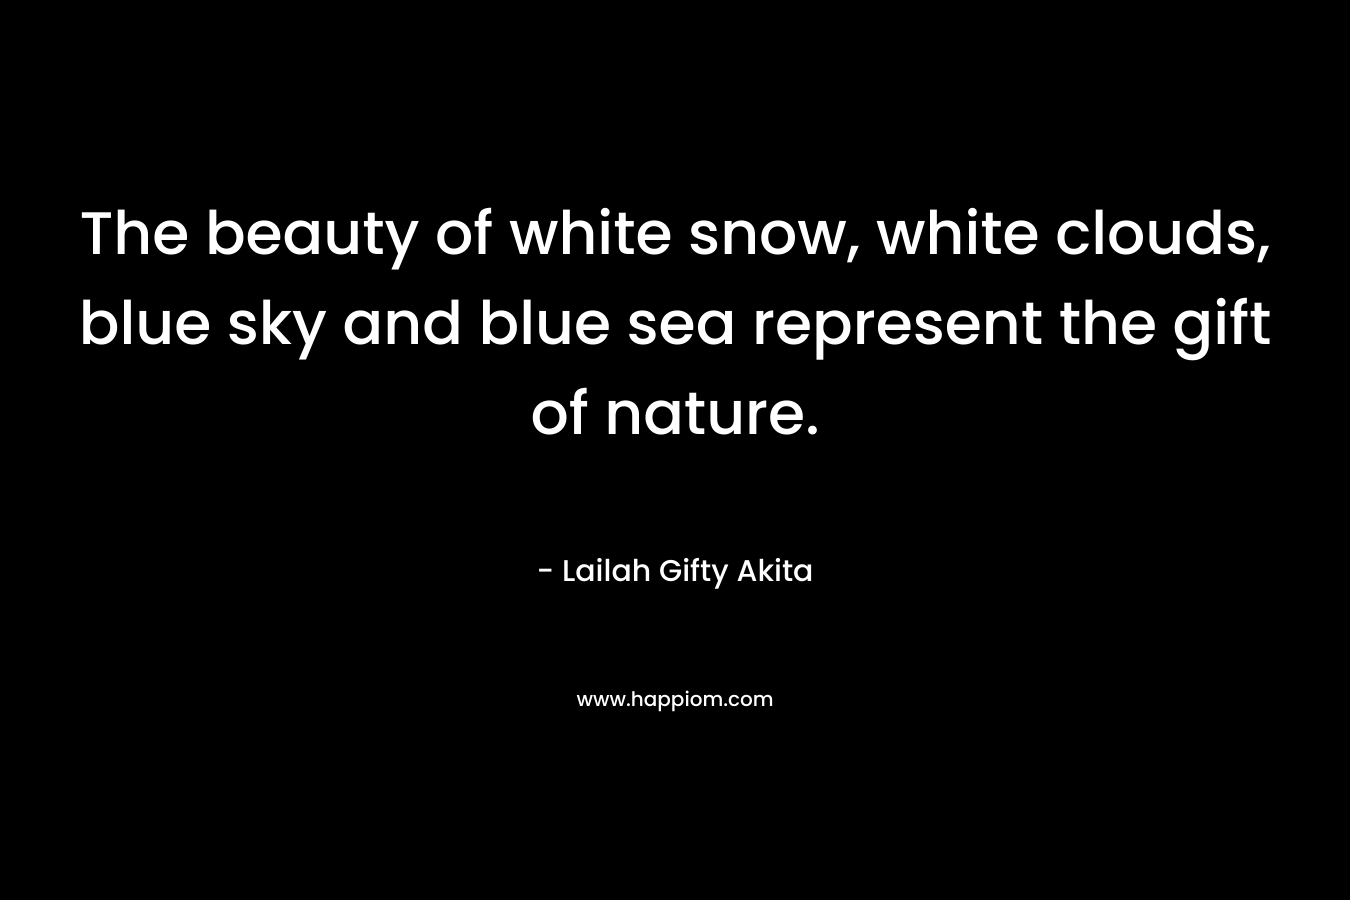 The beauty of white snow, white clouds, blue sky and blue sea represent the gift of nature. – Lailah Gifty Akita